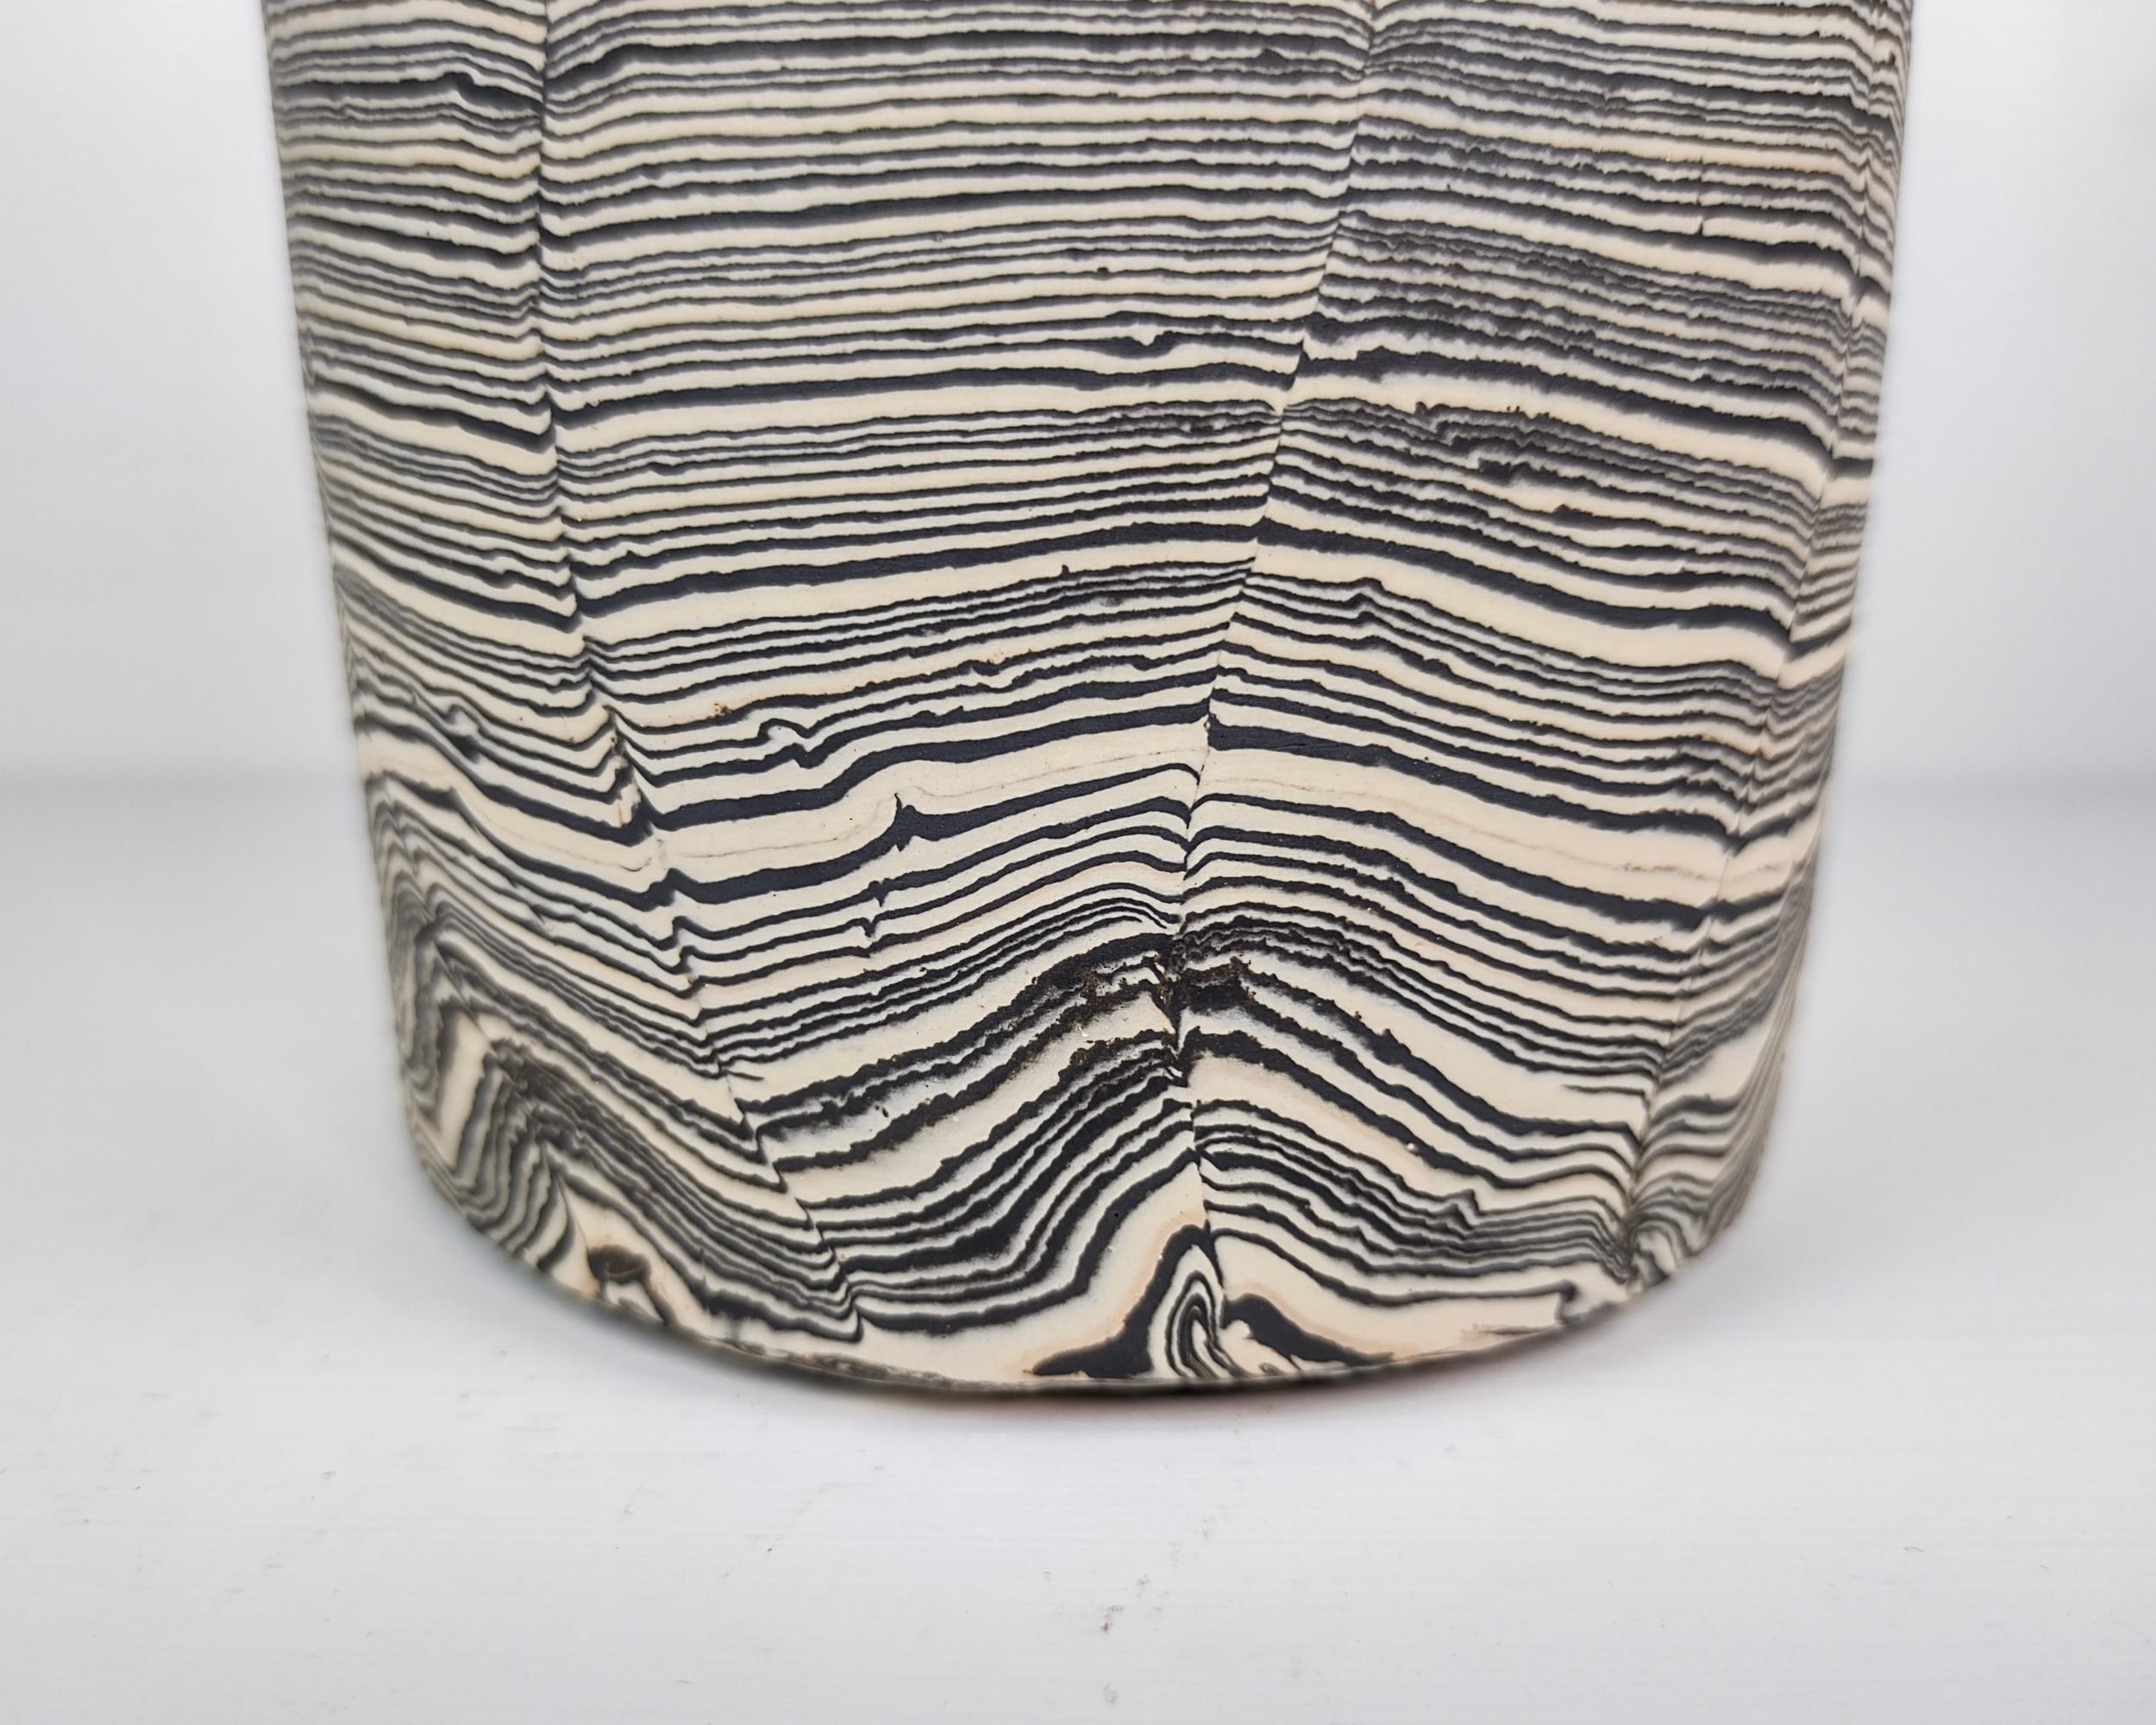 Wide Nerikomi Black and White Striped Vase by Fizzy Ceramics In New Condition For Sale In Hawthorne, CA